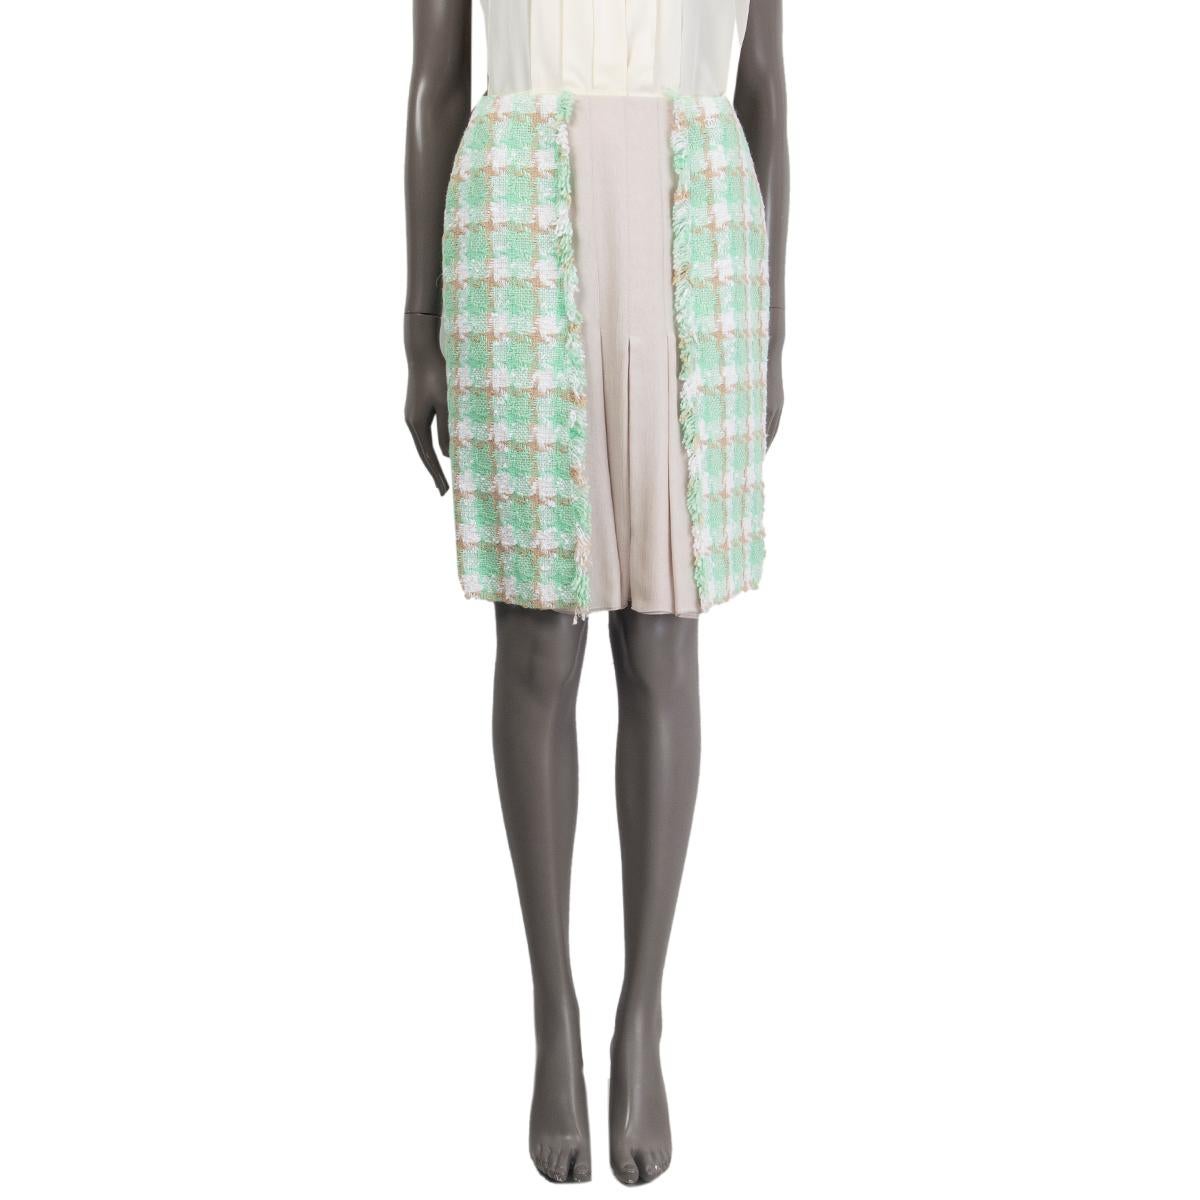 100% authentic Chanel tweed skirt in mint, beige and white vicose (55%), cotton (26%) and wool (19%) with pale grey box pleated silk chiffon panel in the front. Opens with a zipper in the back. Lined in silk (with 5% elastane). Has been worn and is